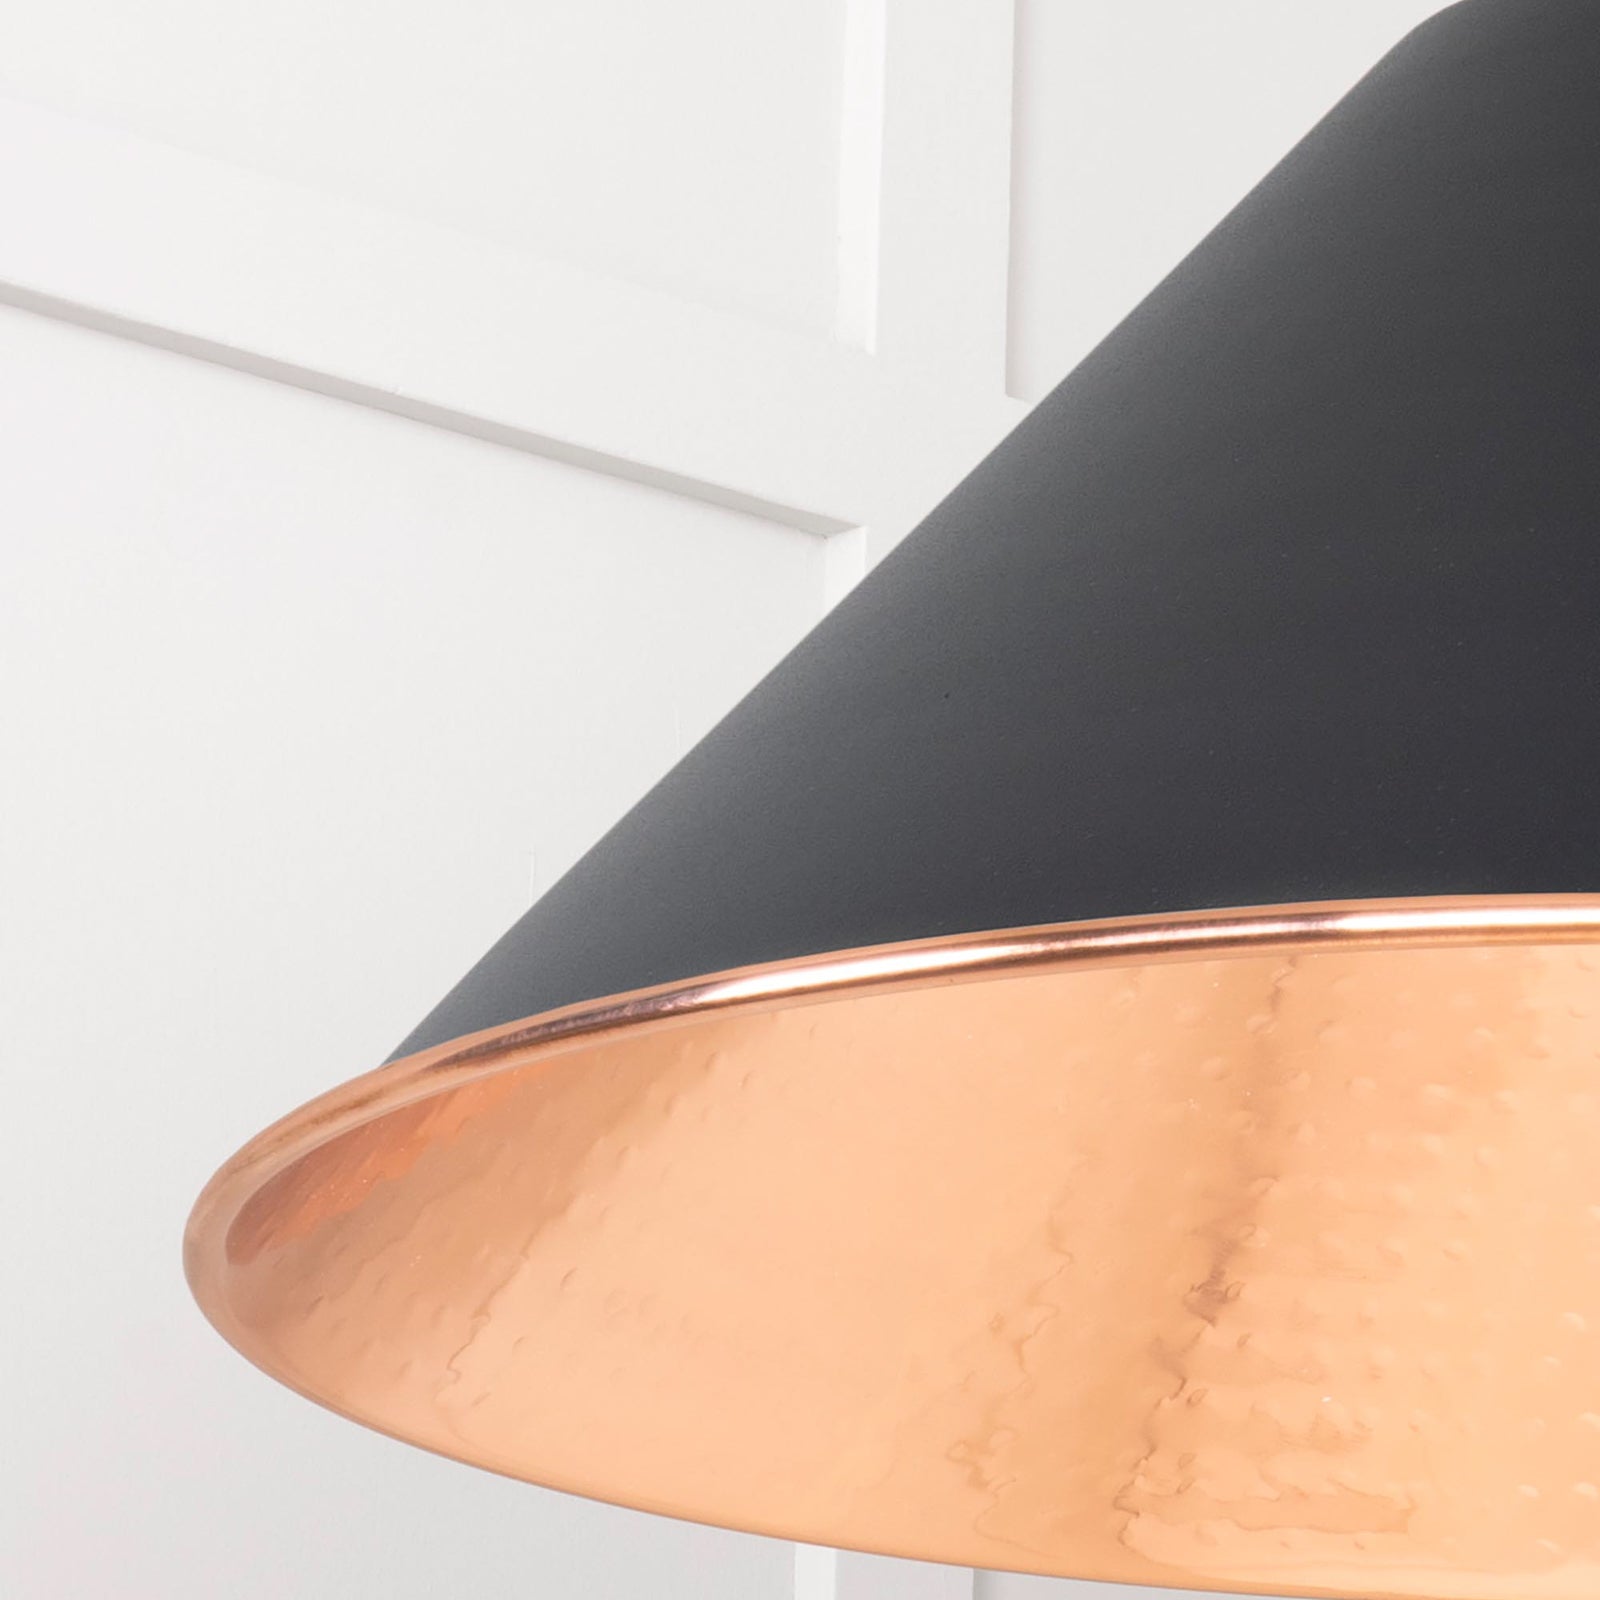 SHOW Close Up Image of Hockley Ceiling Light in Elan Black in Hammered Copper